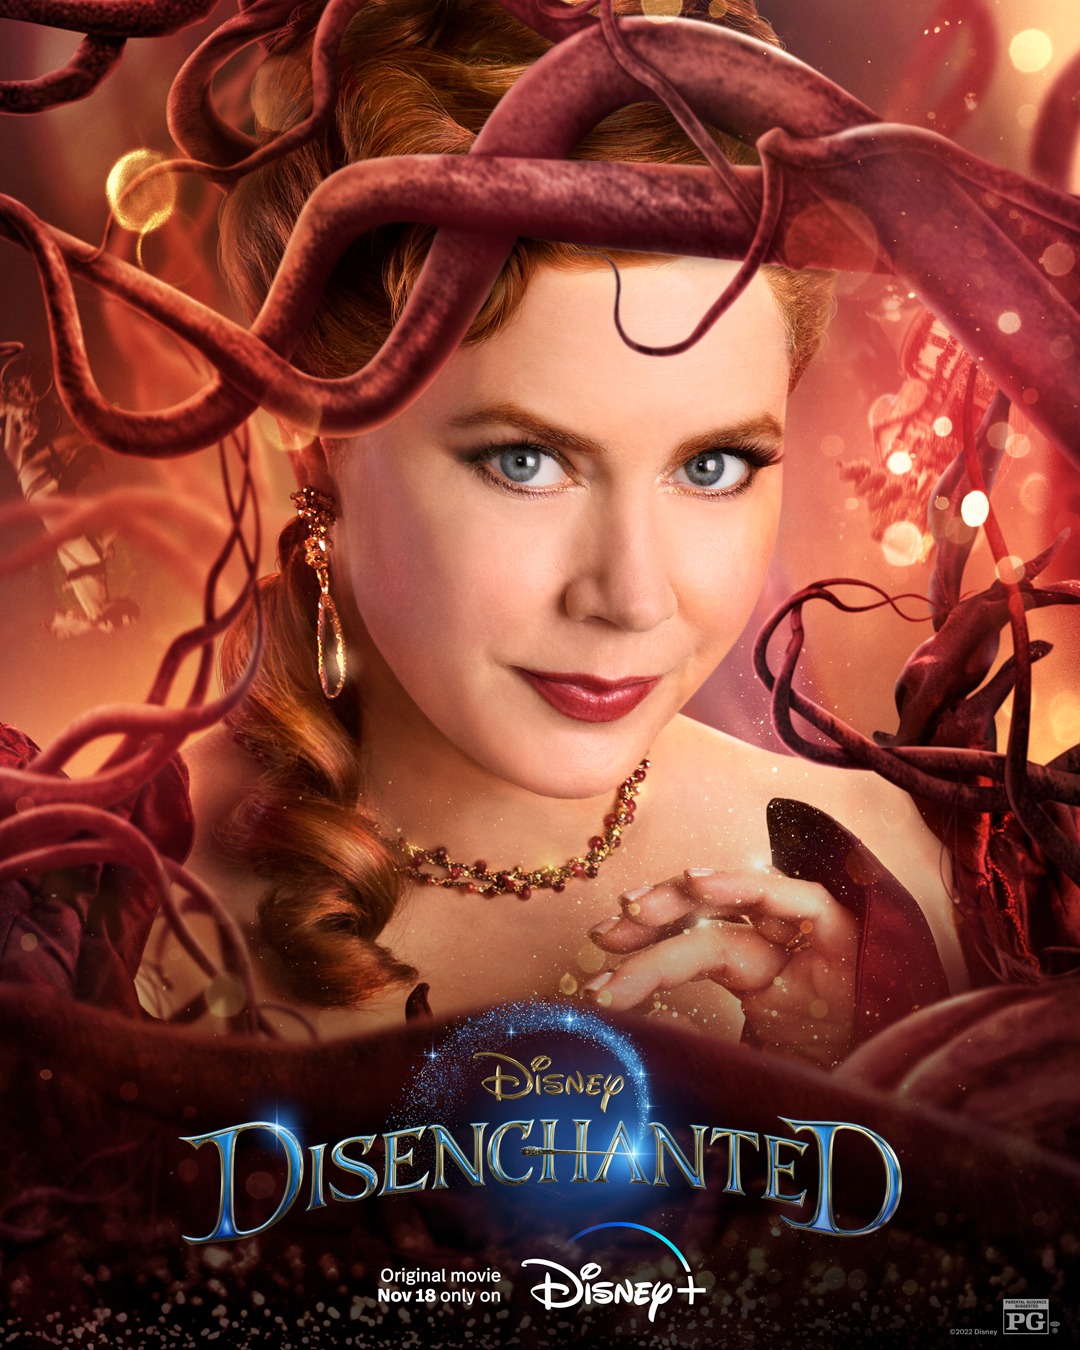 First Look: ‘Disenchanted’ Starring Amy Adams